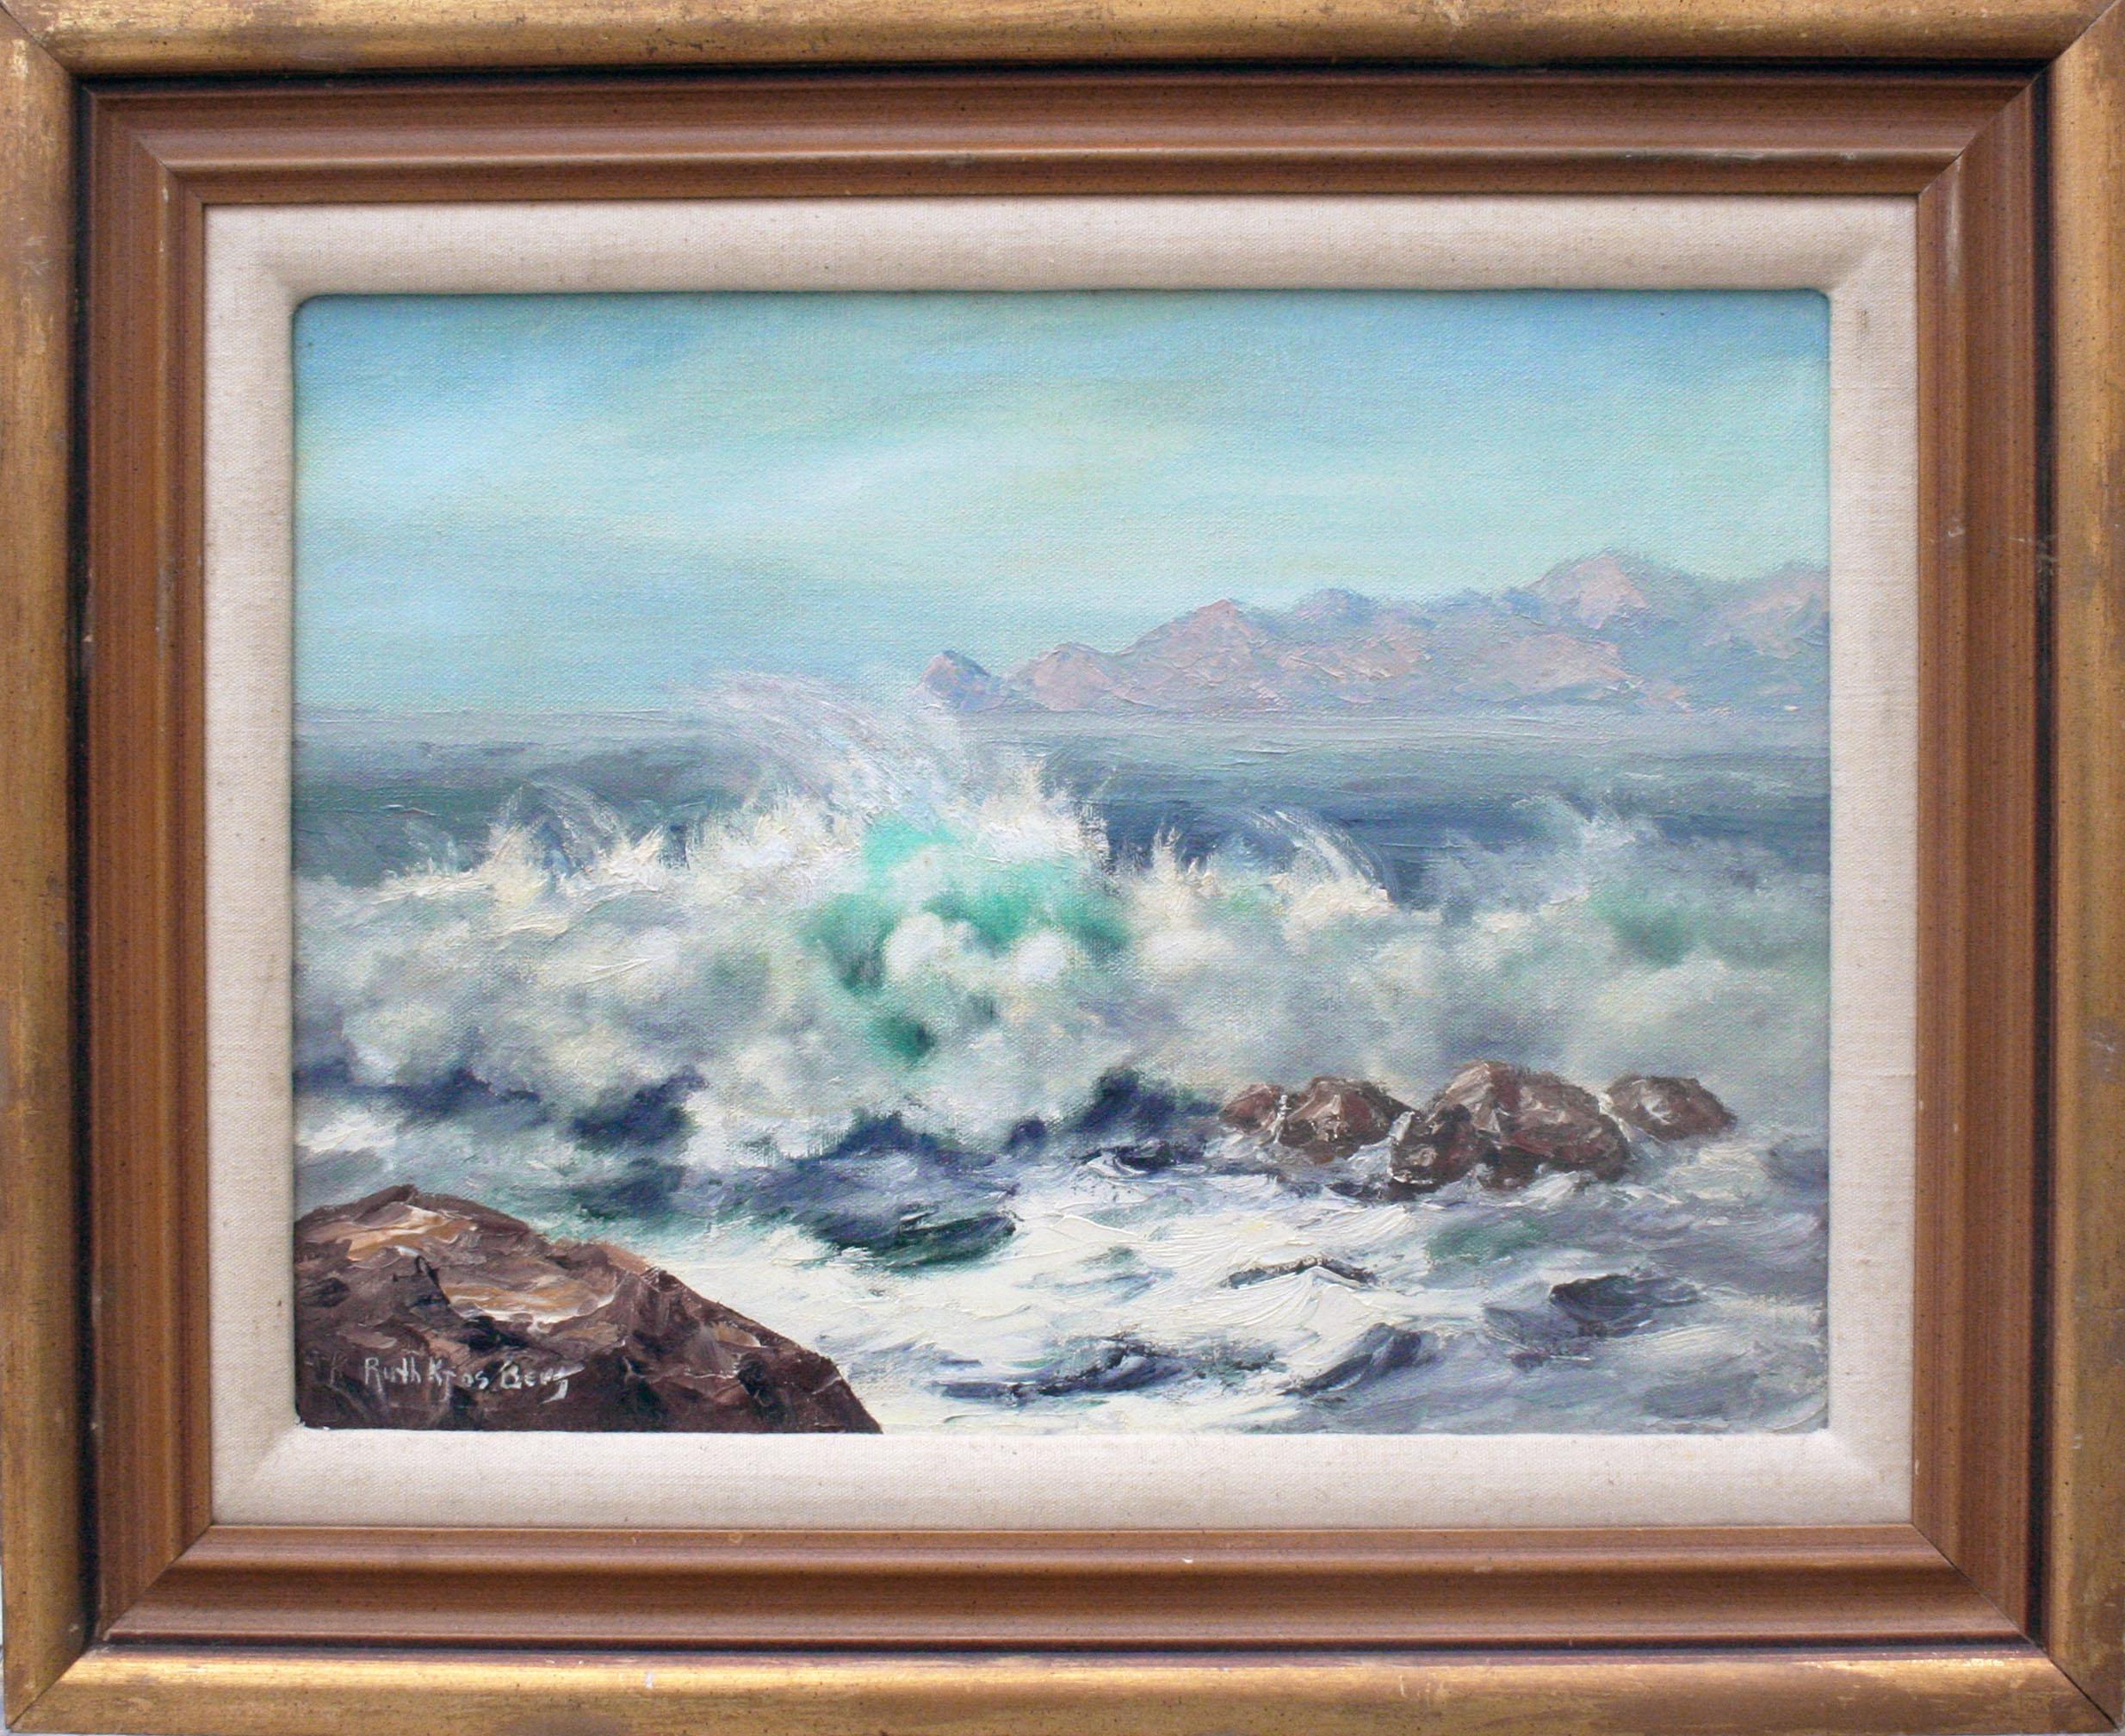 Ruth Kjos Berg Landscape Painting - "The Active Sea", Mid Century Pacific Crashing Waves Seascape